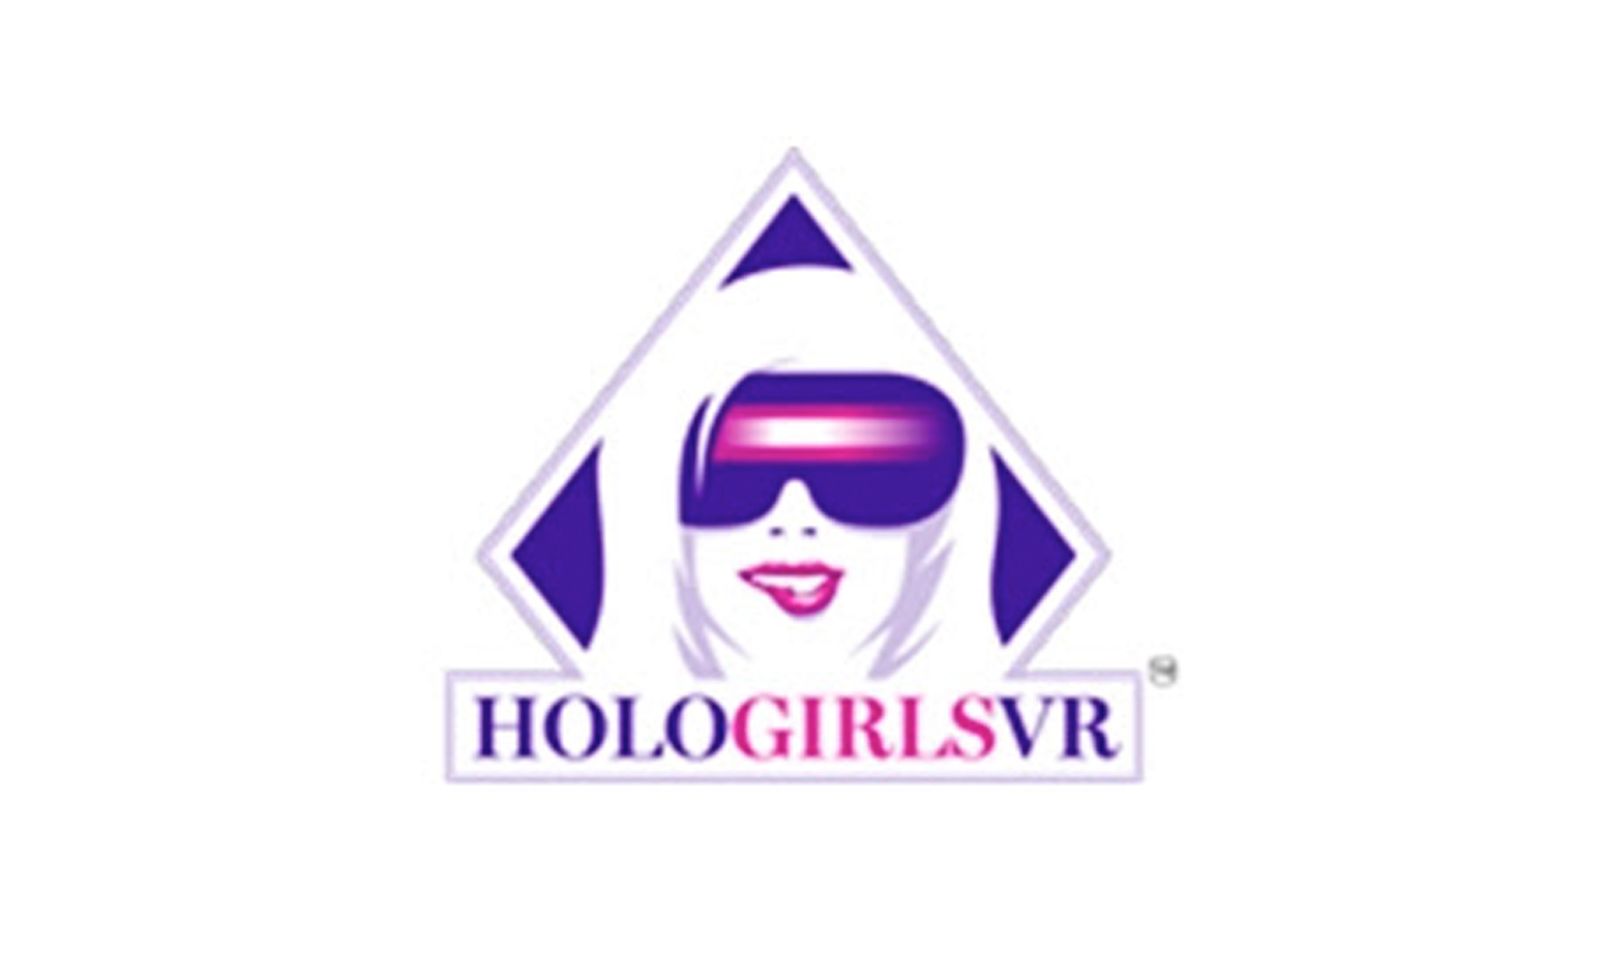 HoloGirlsVR Offering Licensing Deals on Virtual Reality Content